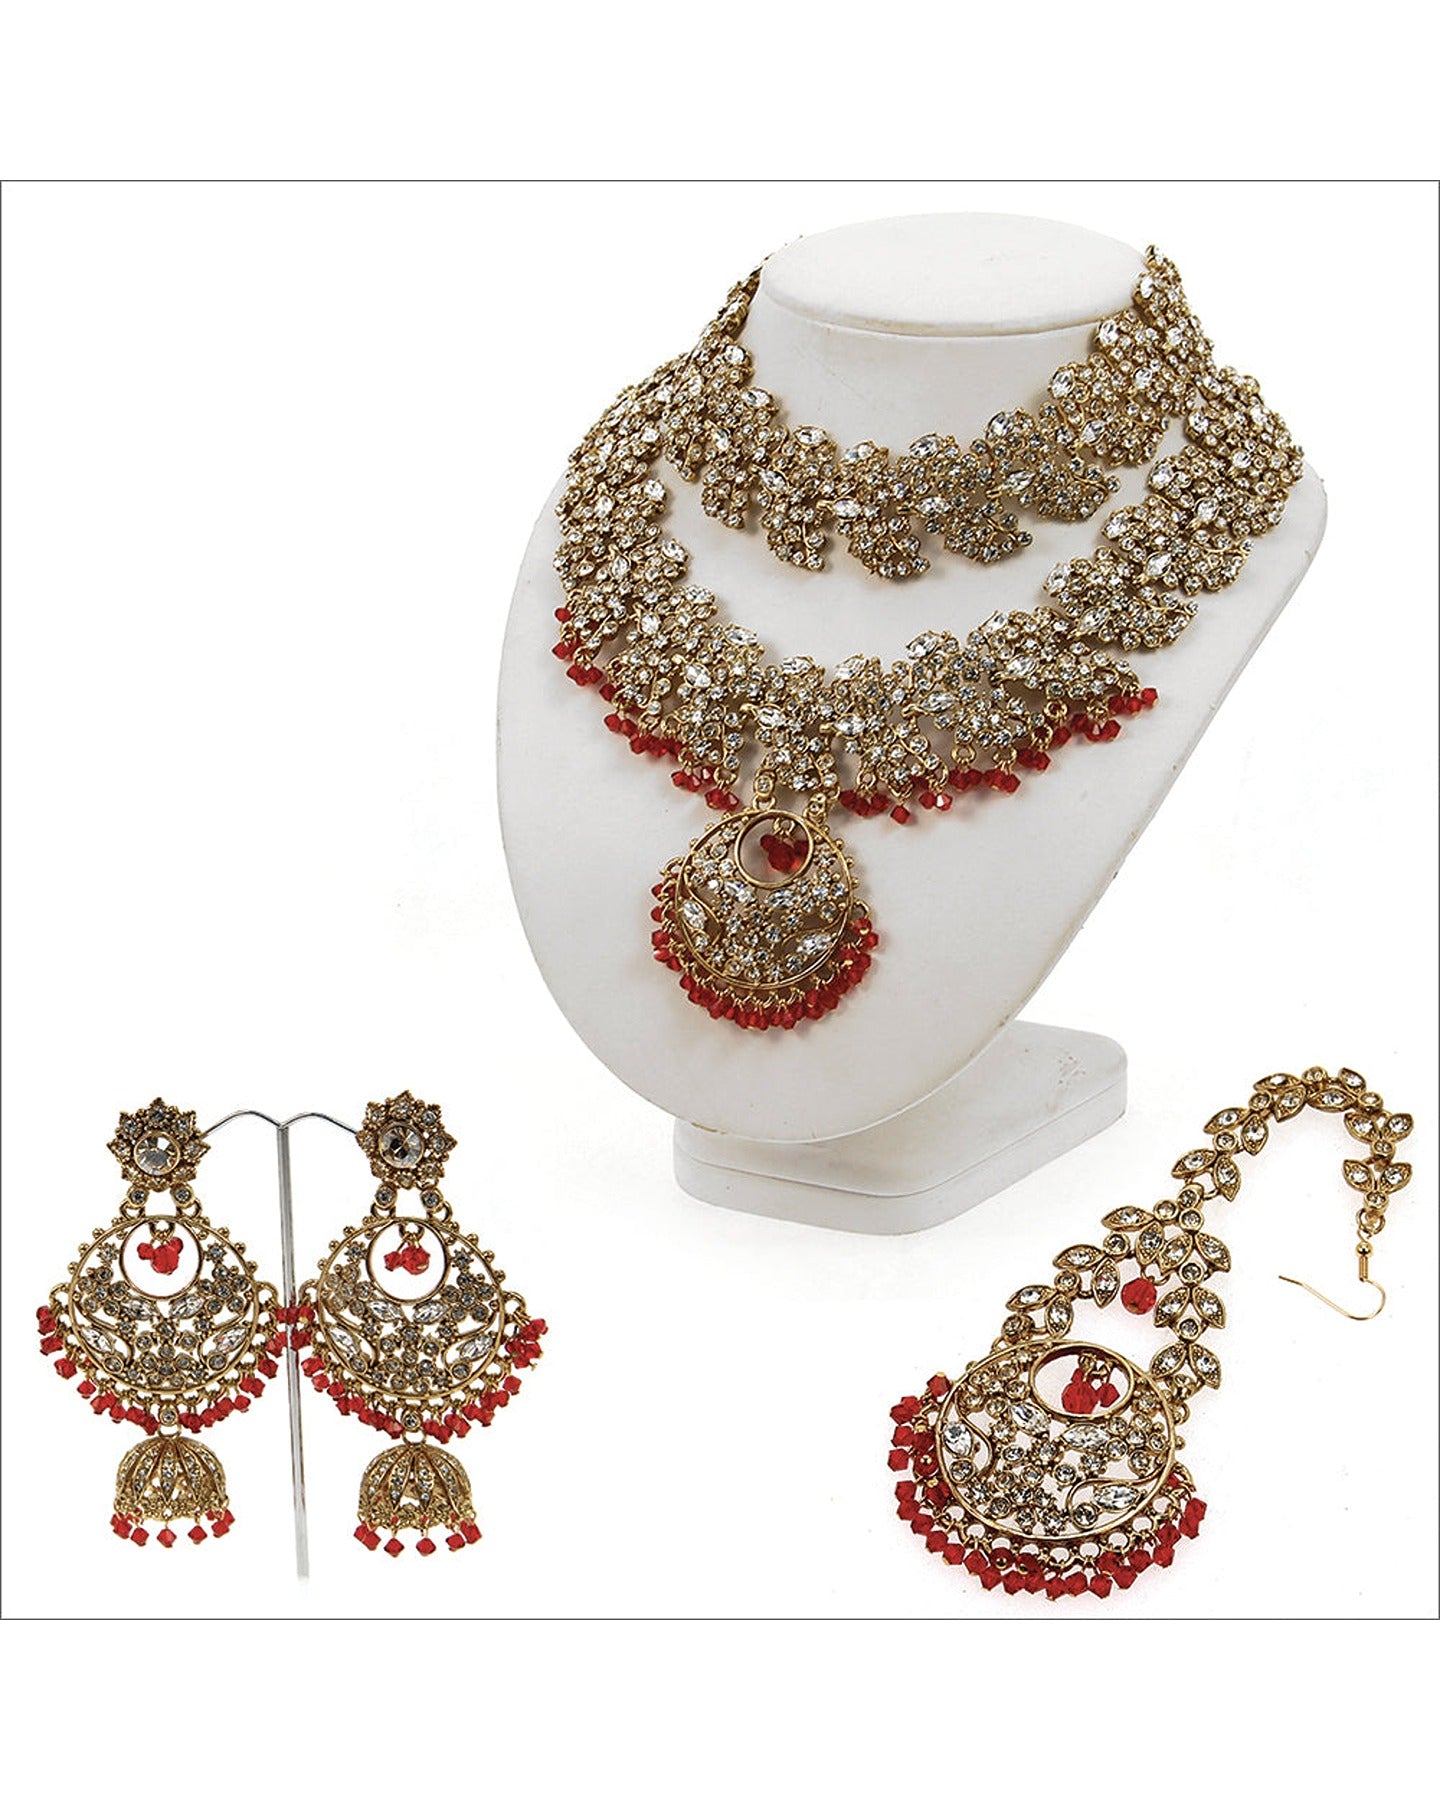 Antique Gold Jewelry with Crystal and Crystal Golden Shadow Stones